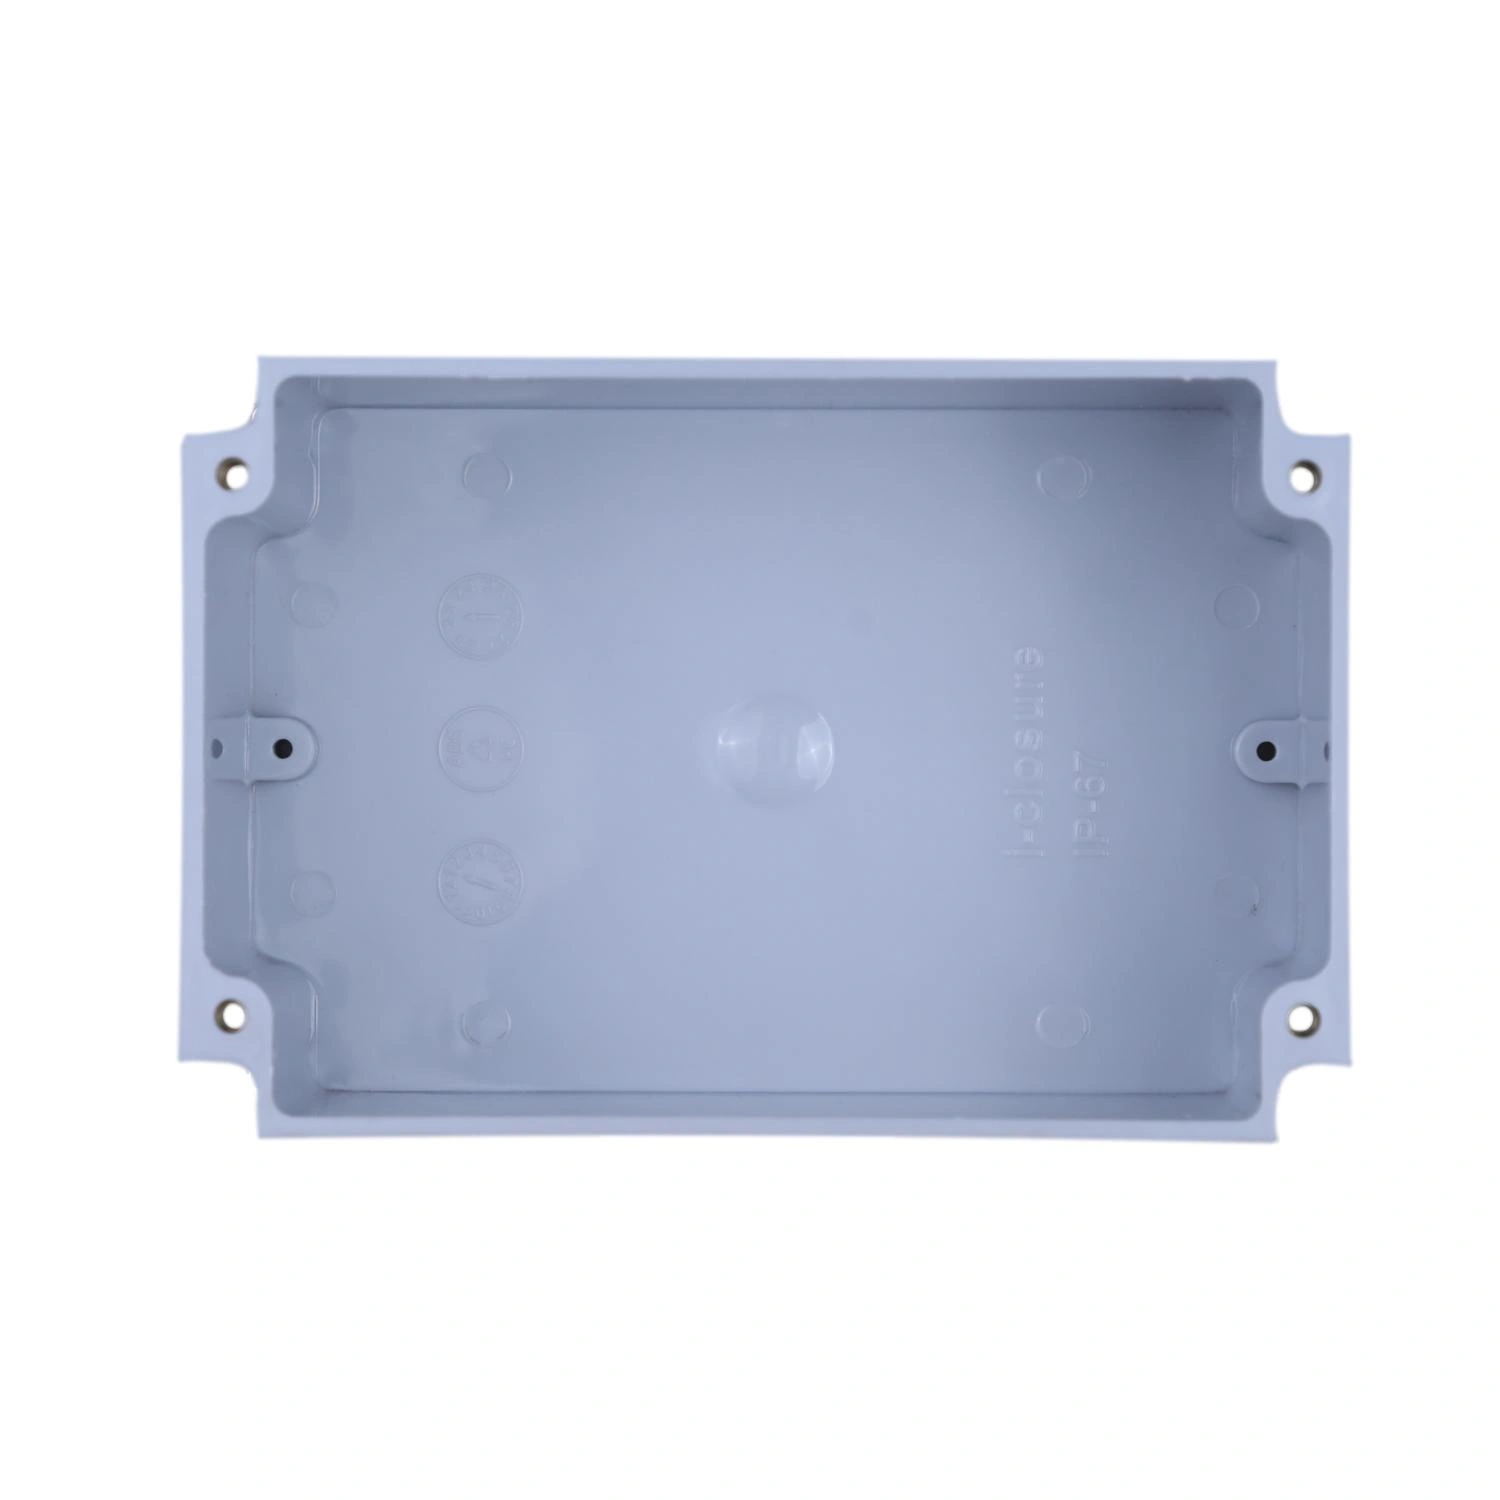 ABS Enclosure 120 x 80 x 55 mm Clear IP67-1